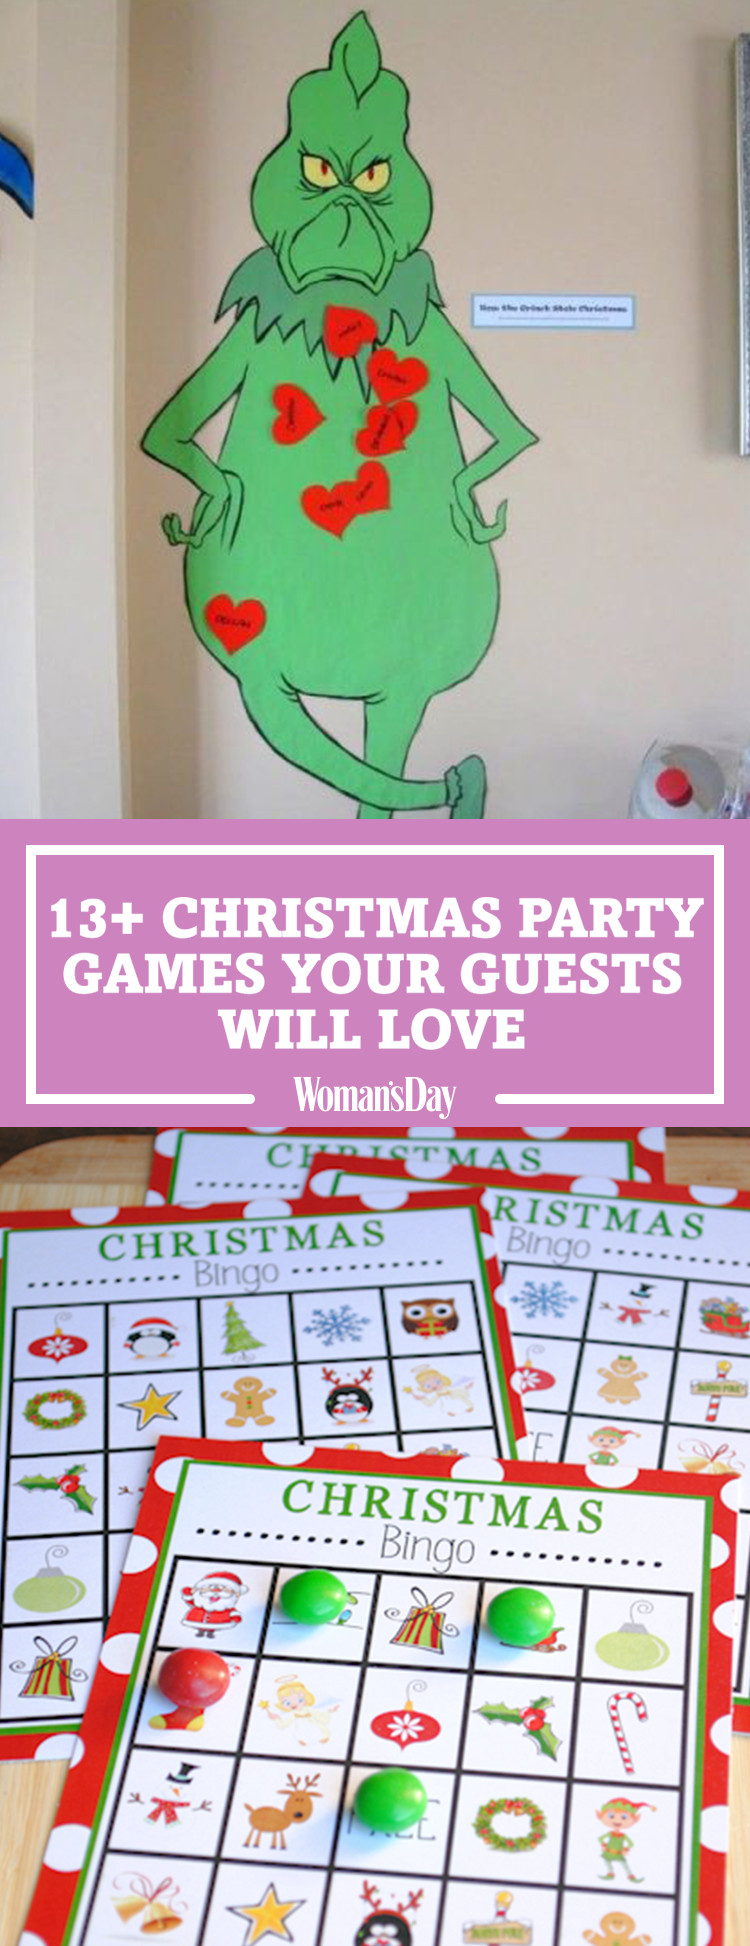 Holiday Party Game Ideas
 17 Fun Christmas Party Games for Kids DIY Holiday Party